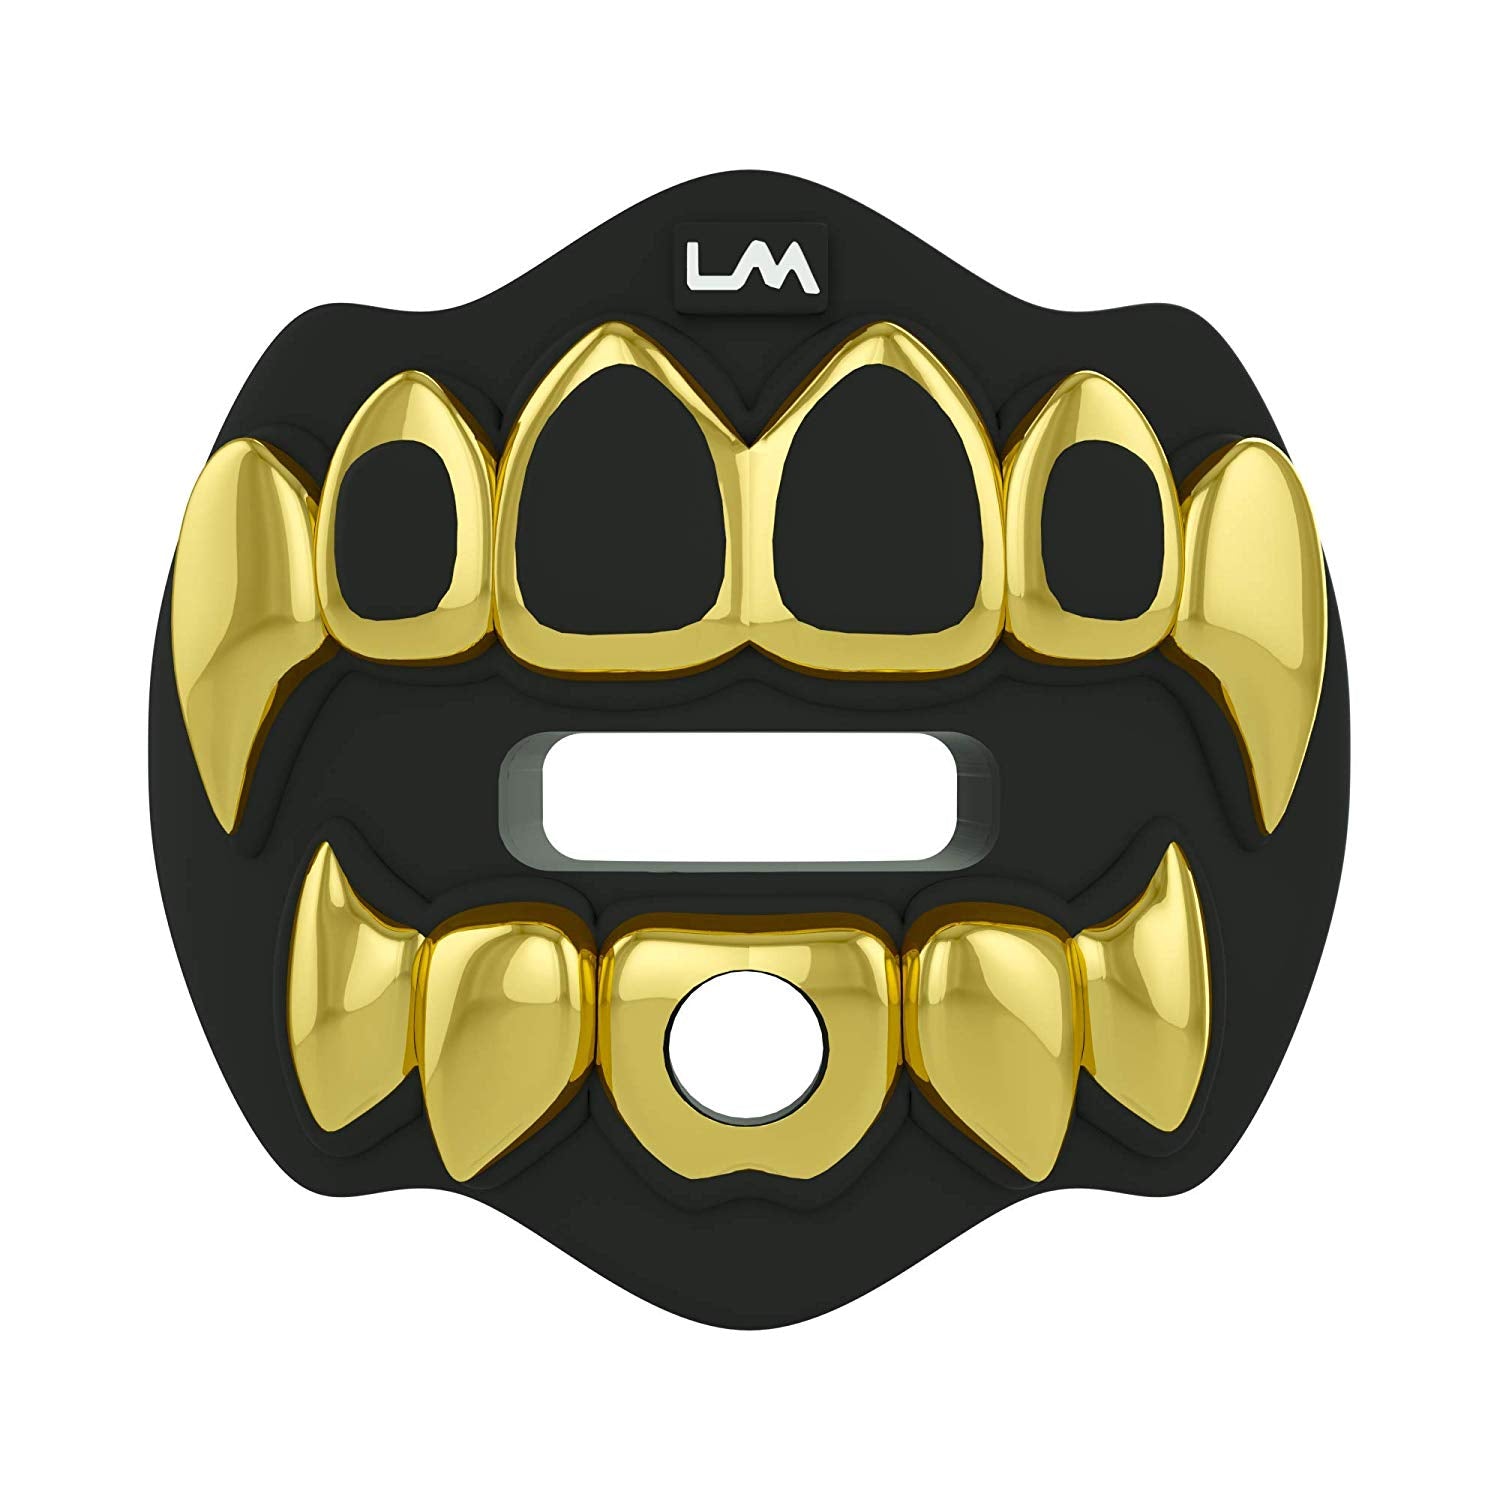 Buy The Best Football Mouthpieces